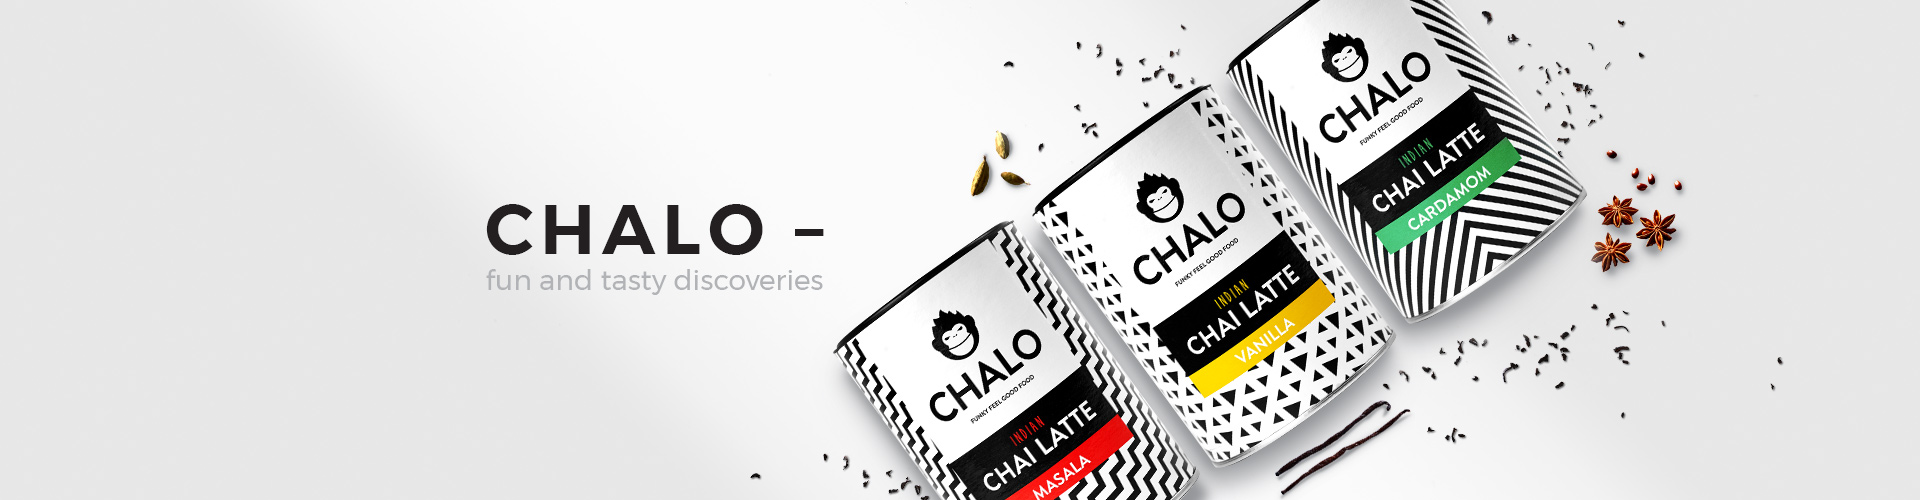 Chalo – fun and tasty discoveries